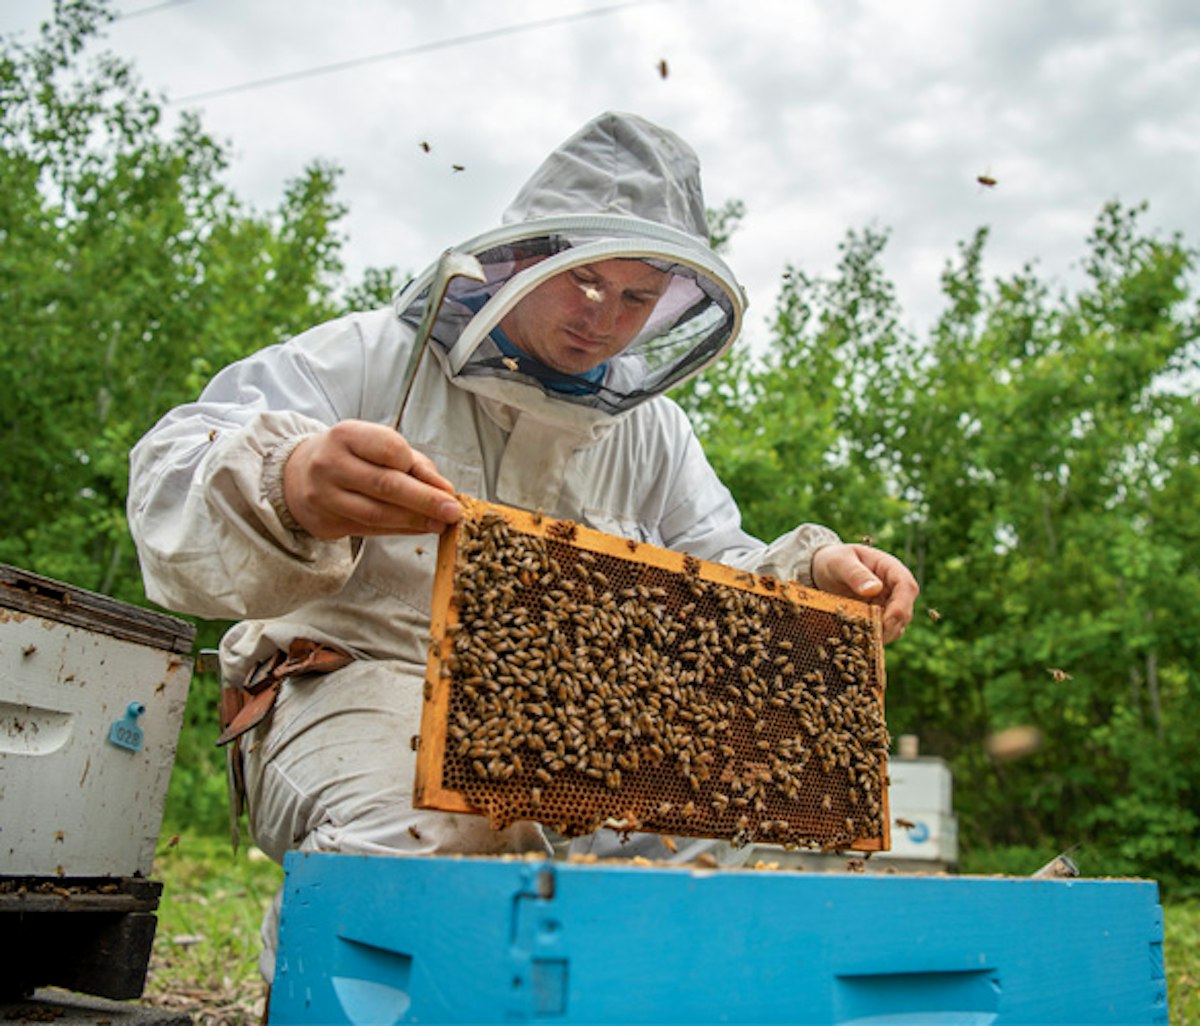 Beekeeper inspecting a honeycomb frame amidst flying bees.